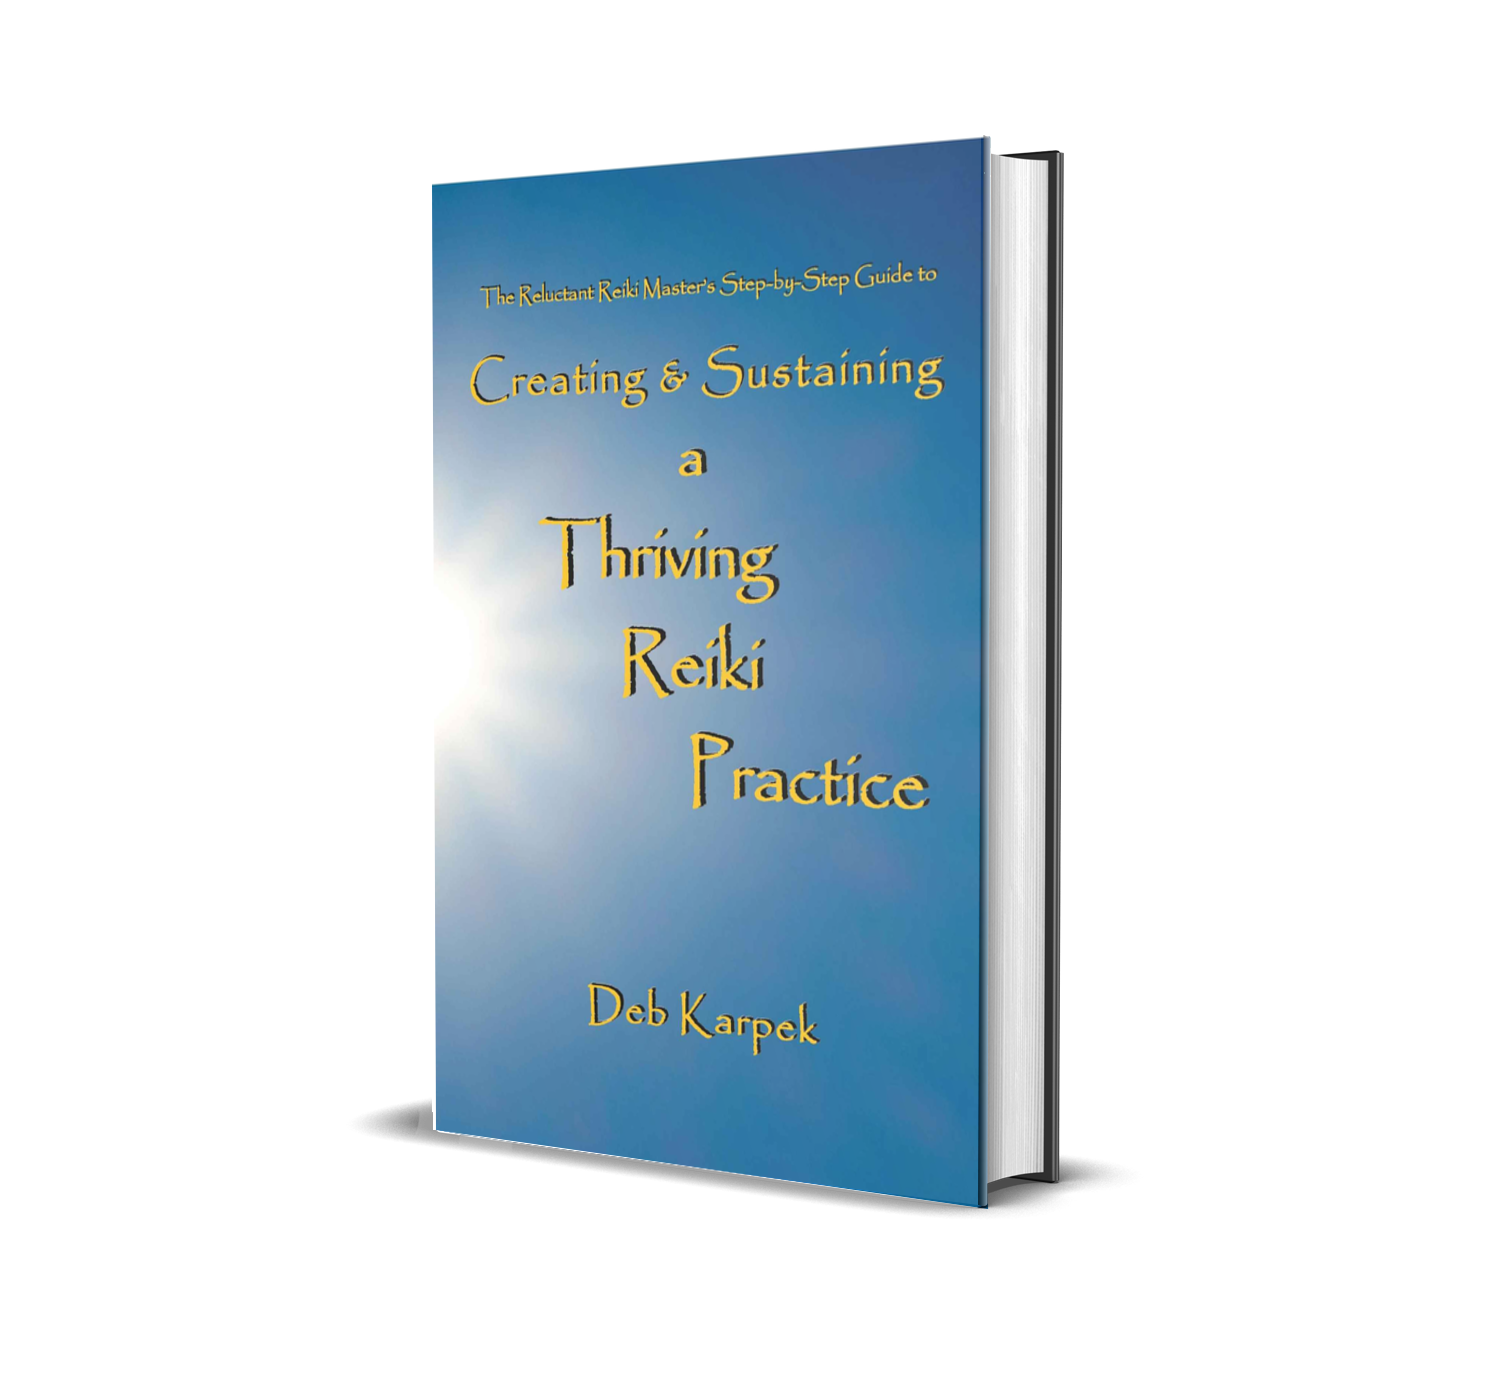 The Reluctant Reiki Master’s Step-by-Step Guide to Creating and Sustaining a Thriving Reiki Practice